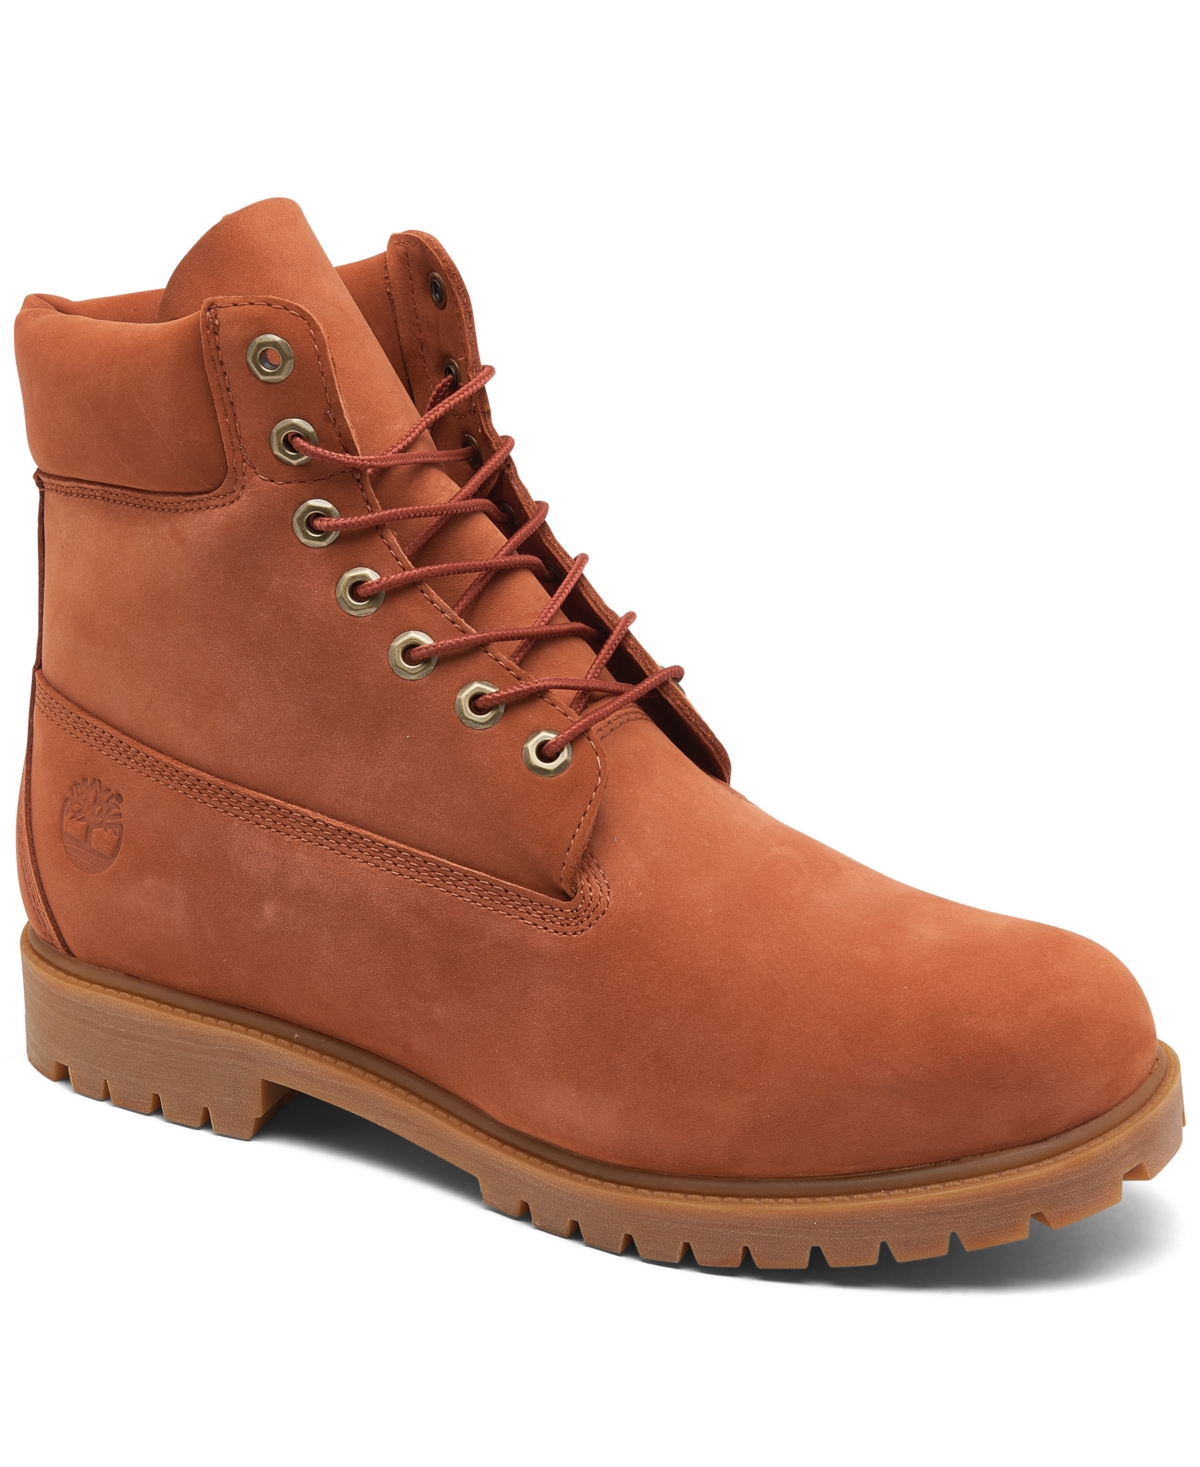 Men's 6" Premium Water Resistant Lace-Up Boots from Finish Line - Dark Rust